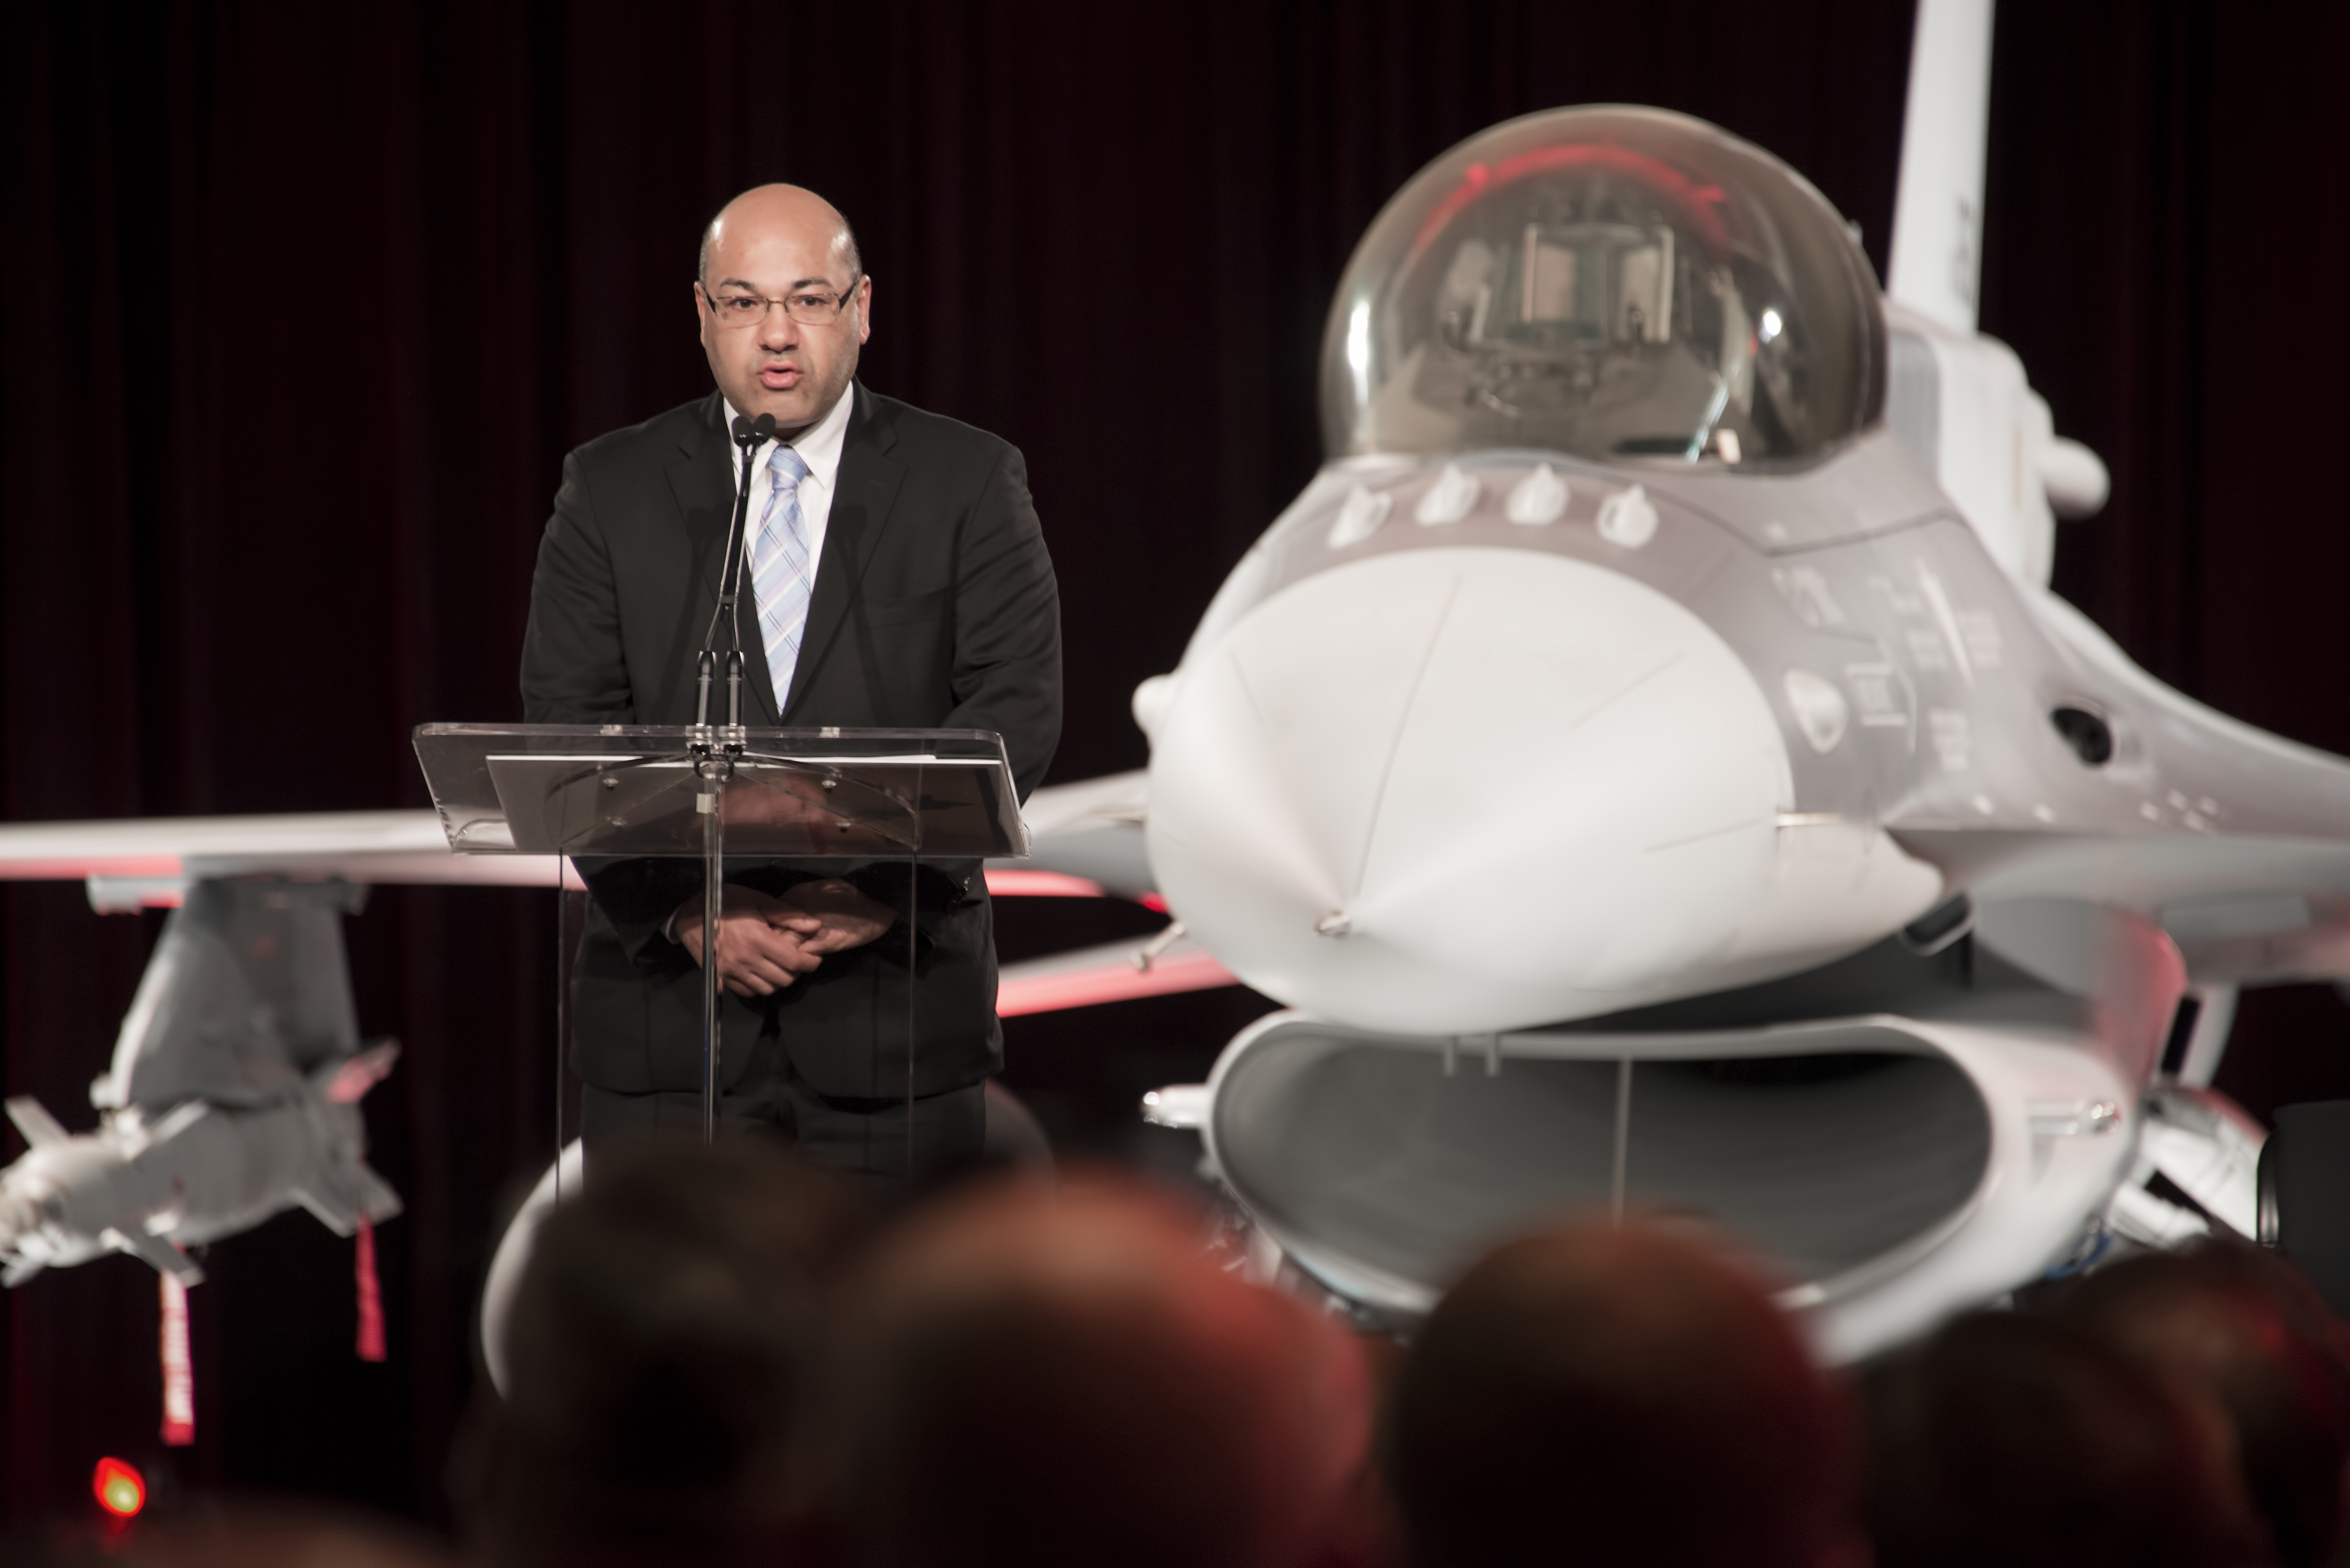 Lukman Faily, Iraq's ambassador to the U.S., accepts his nation's first F-16 fighter at the Lockheed factory in Fort Worth June 5. (Lockheed Martin photo)